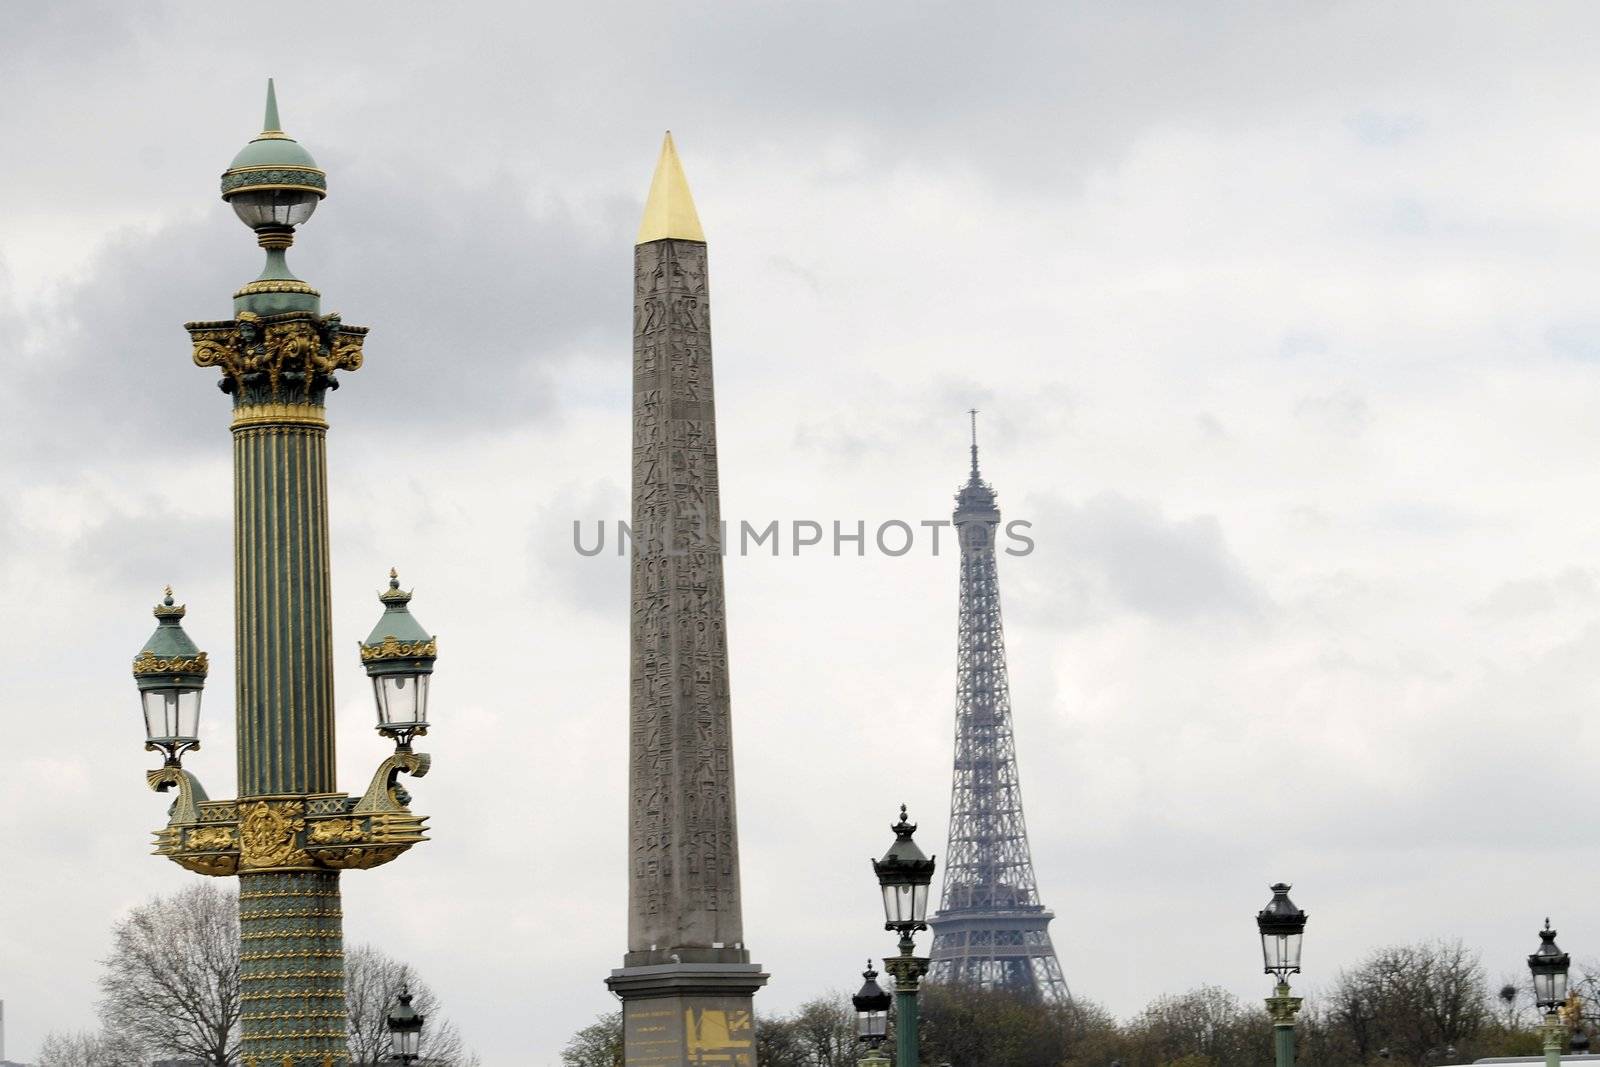 View of the Luxor Ancient Egyptian Obelisk at the centre of the Place de la Concorde in Paris, France. It was originally located at the entrance to Luxor Temple, in Egypt.